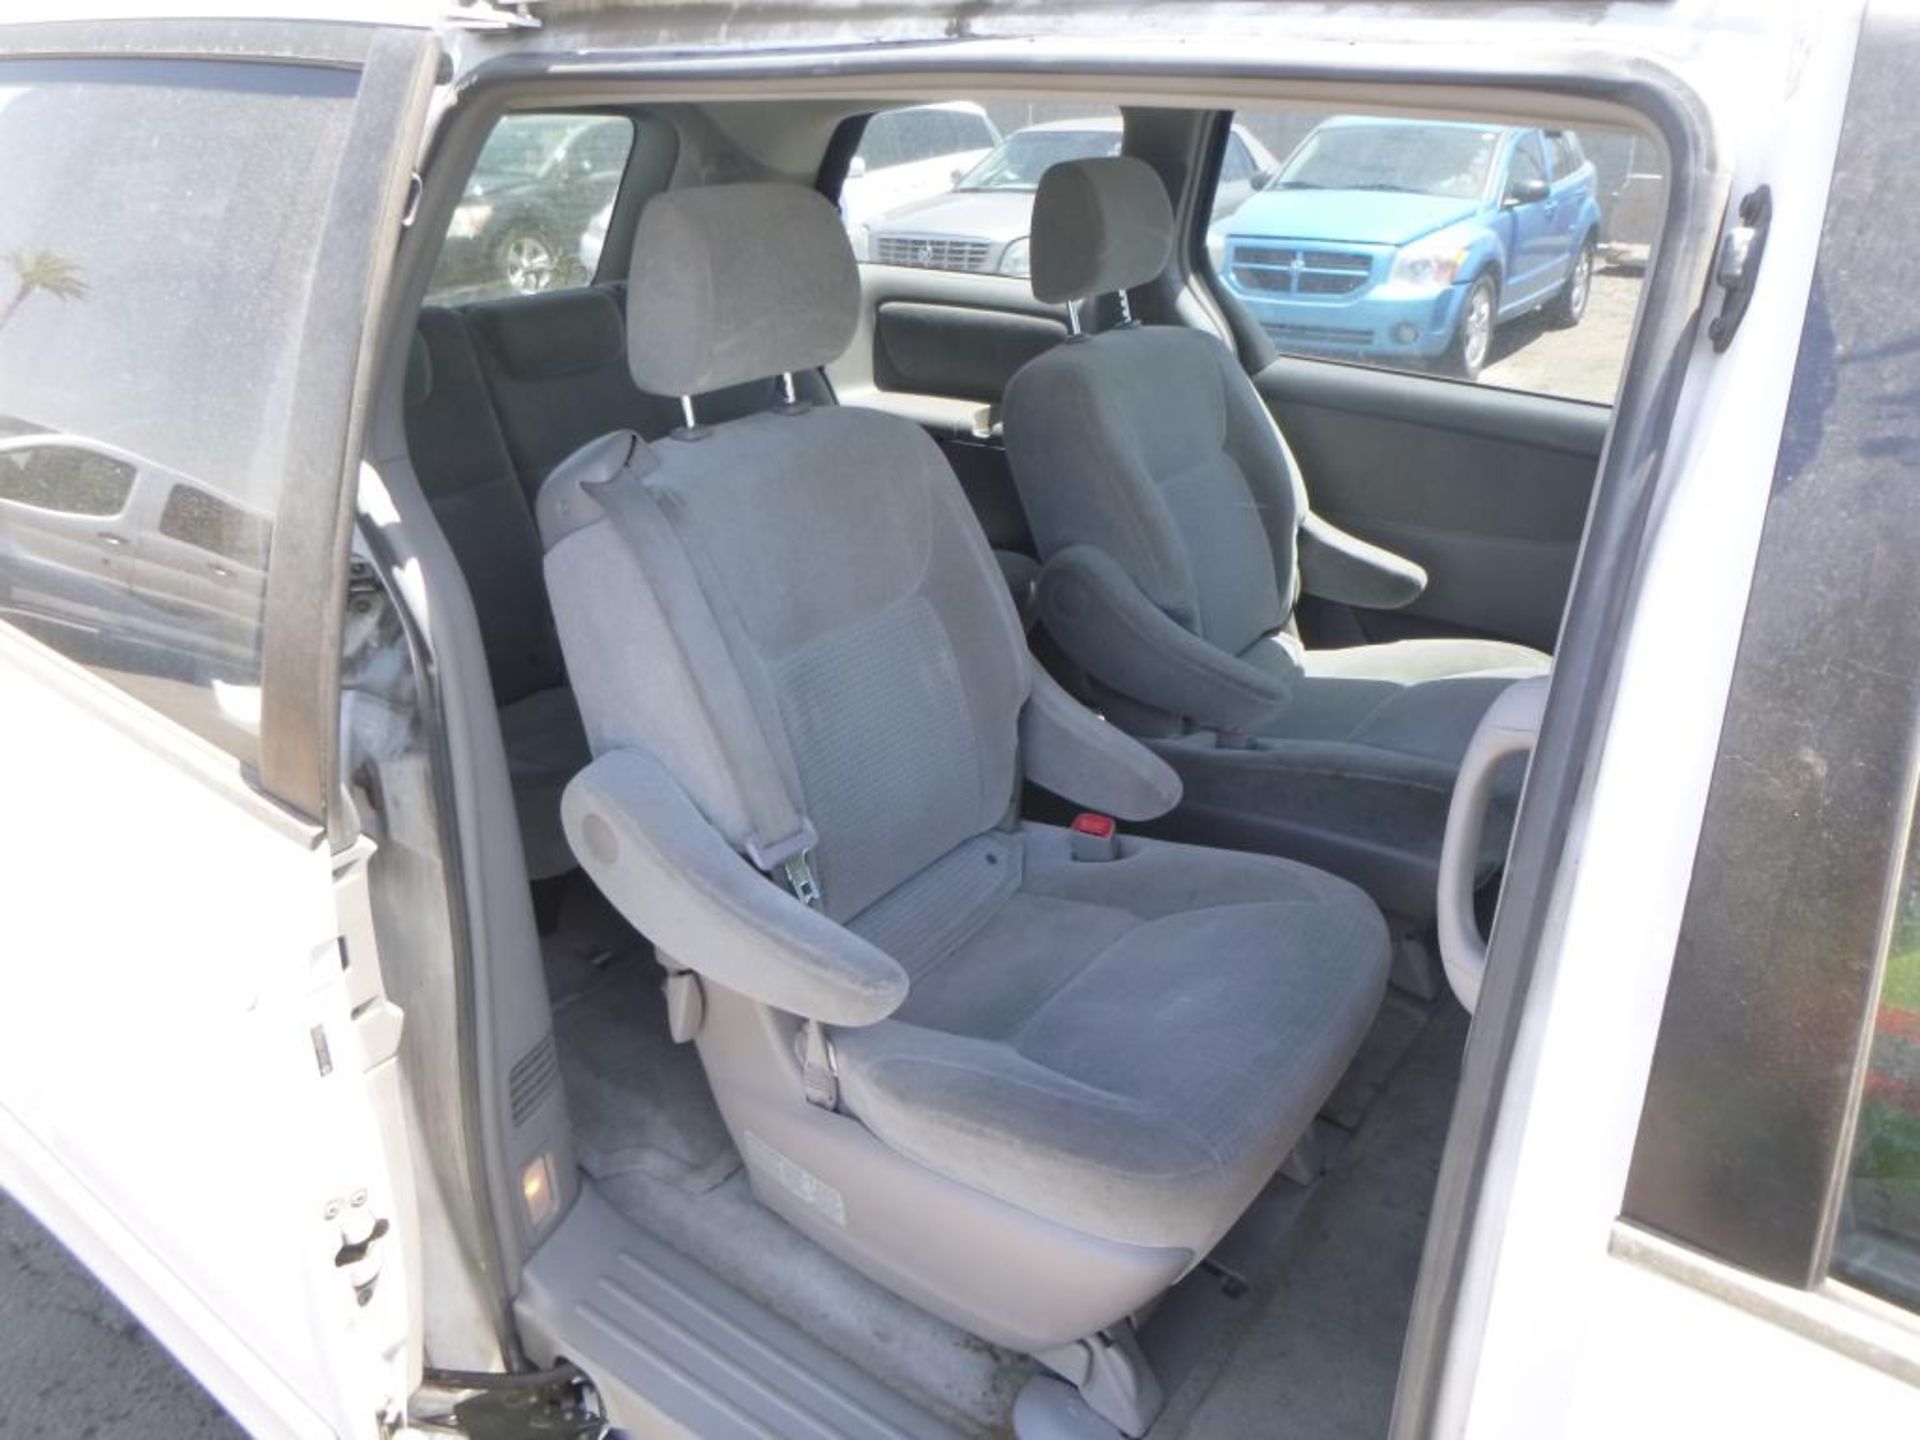 (Lot # 3451) 2006 Toyota Sienna - Image 8 of 13